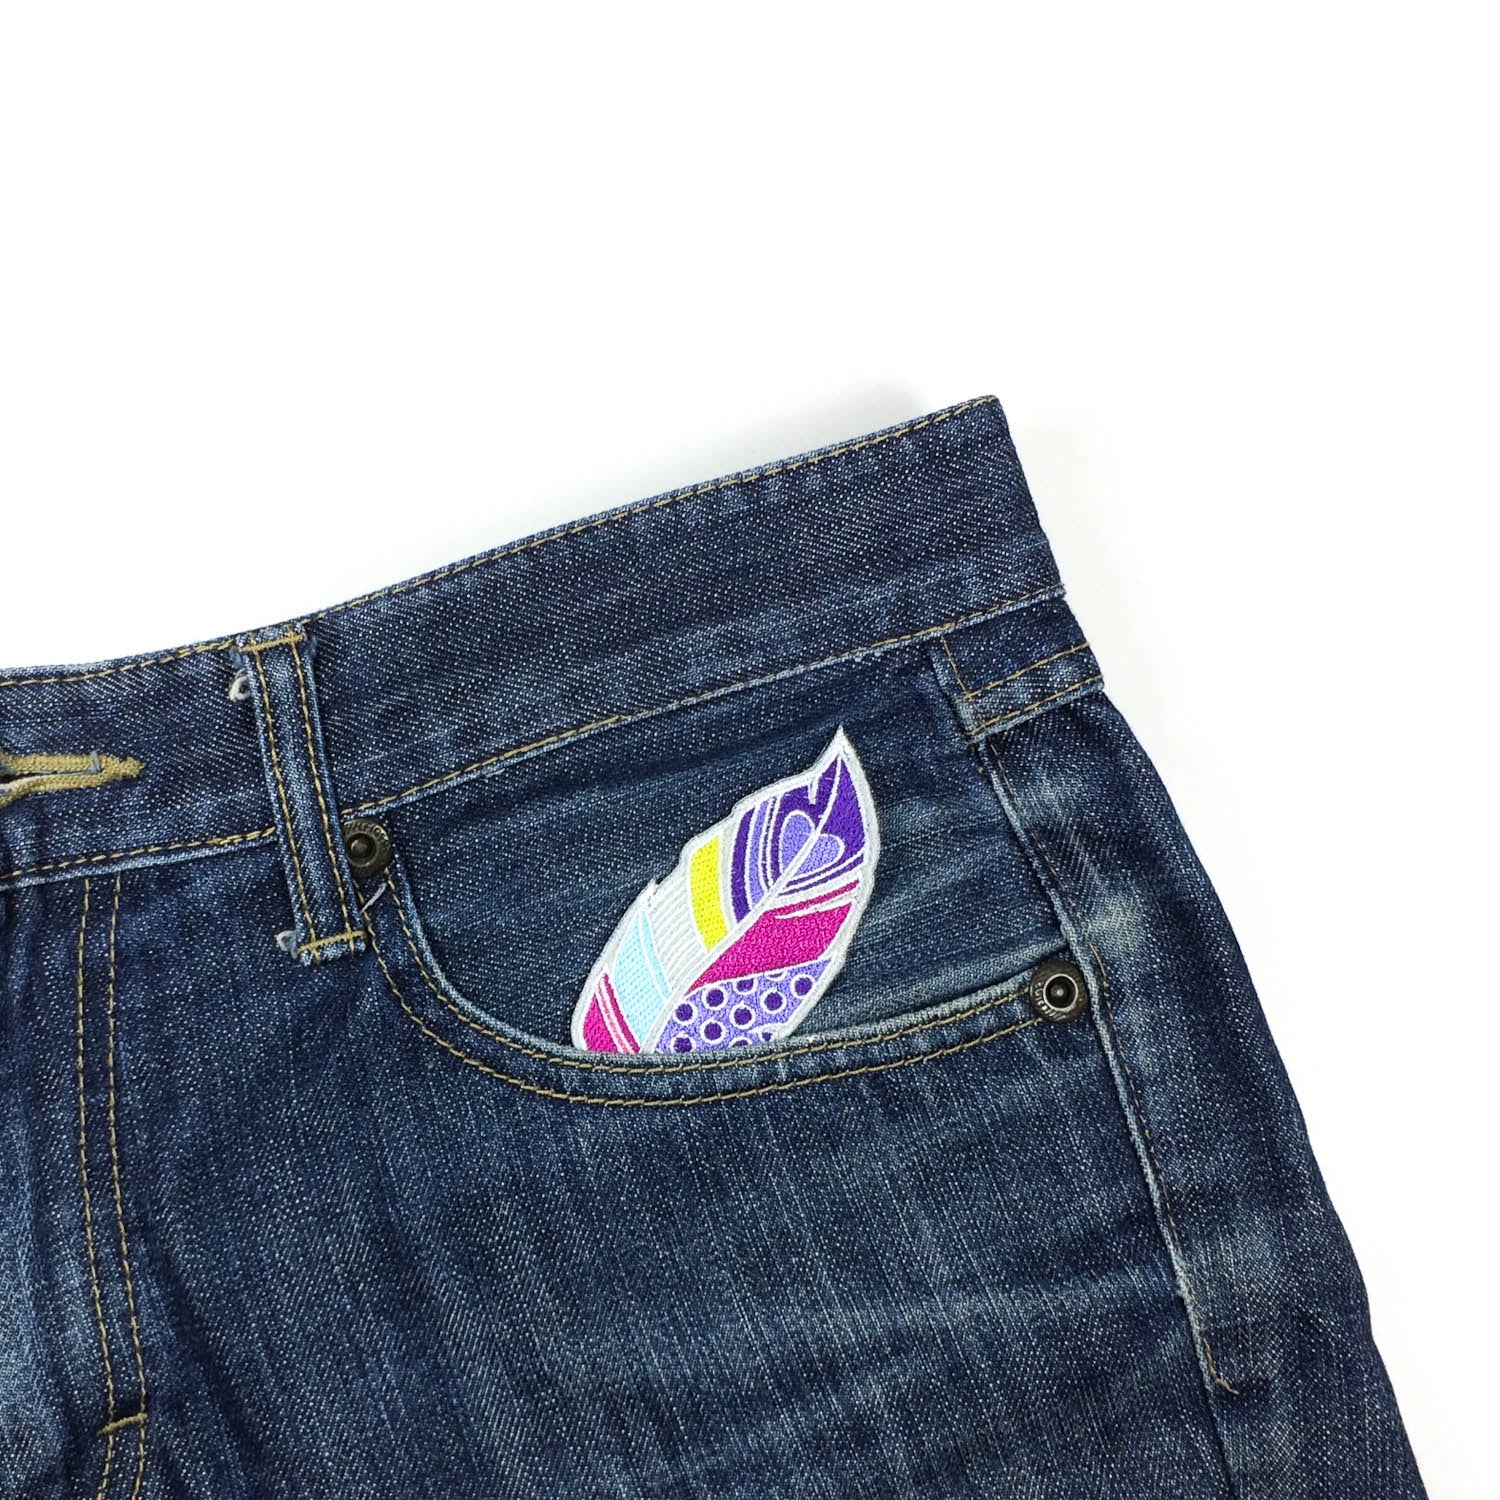 iron-on patch on jeans